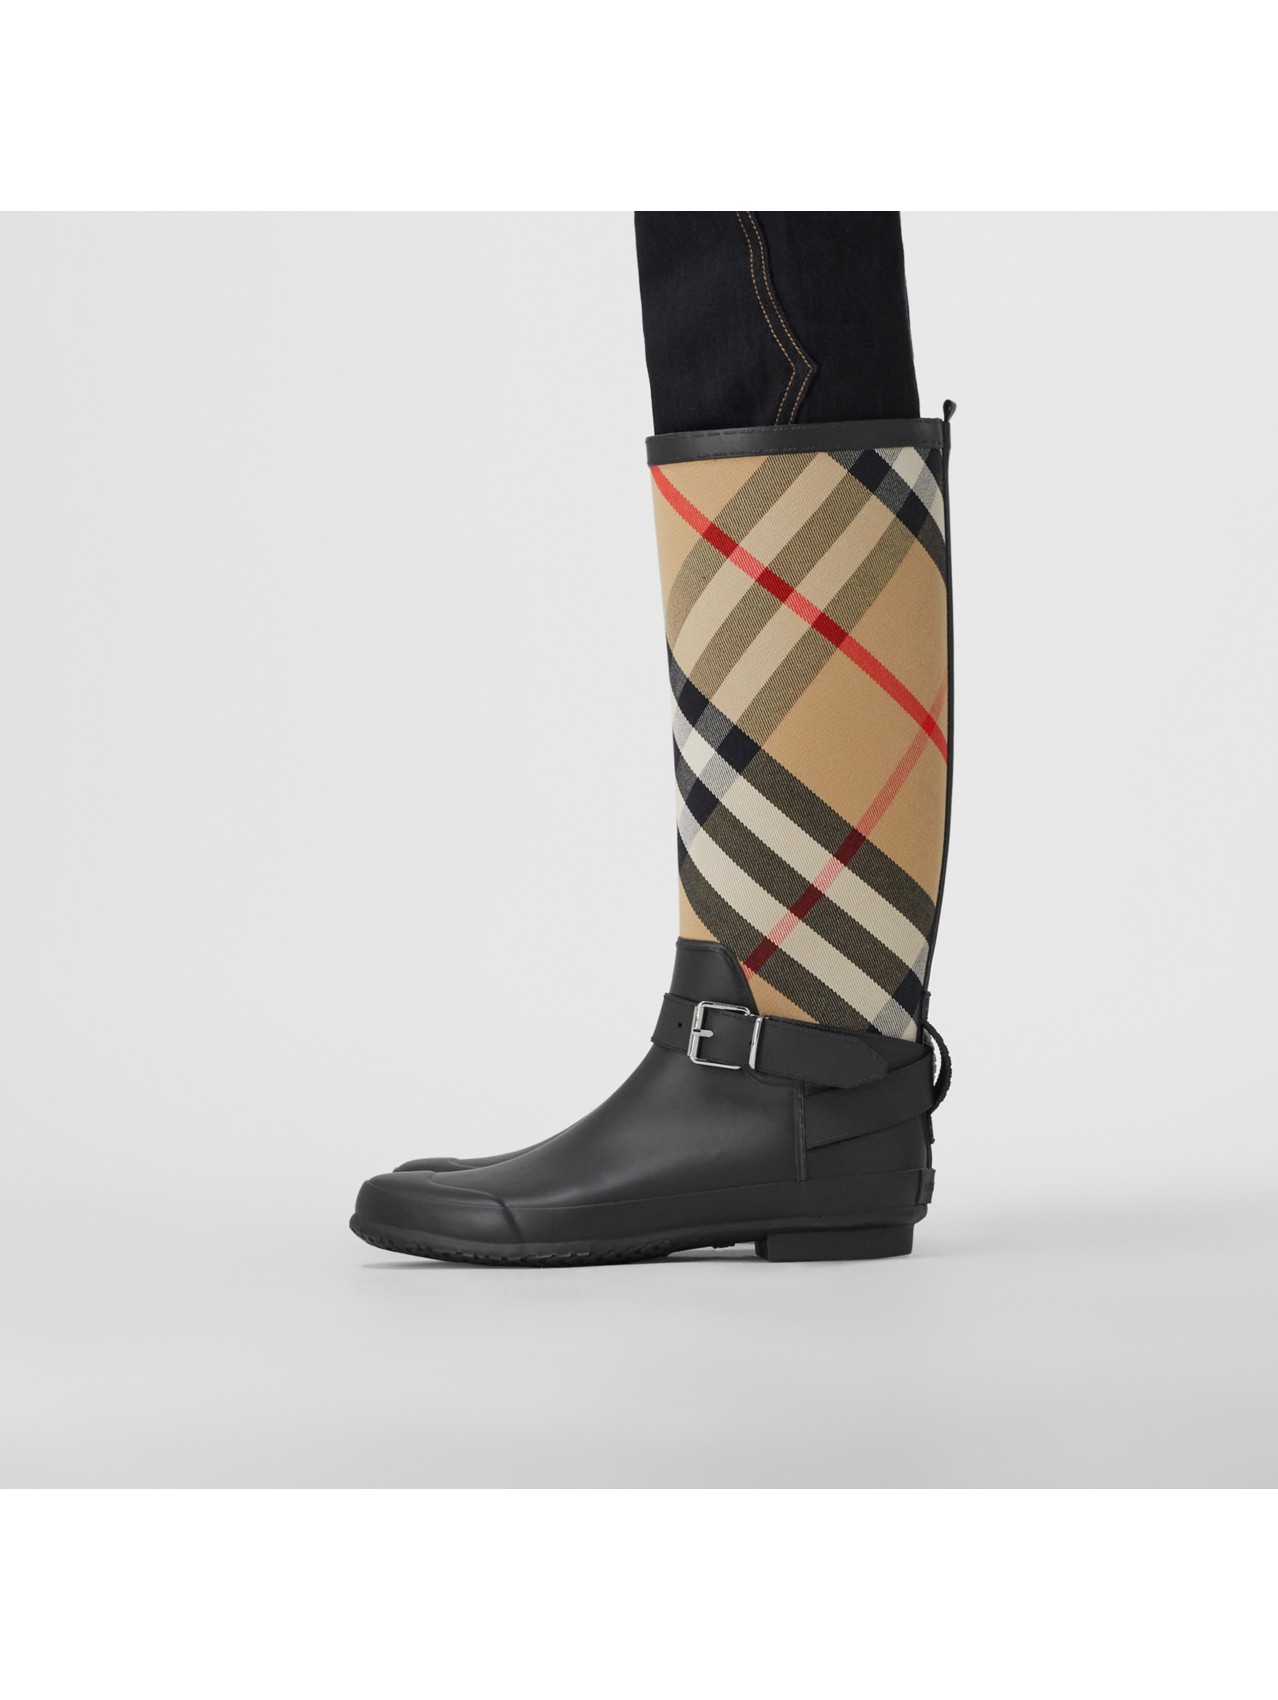 Women’s Designer Boots | Ankle & Knee-high Boots | Burberry® Official